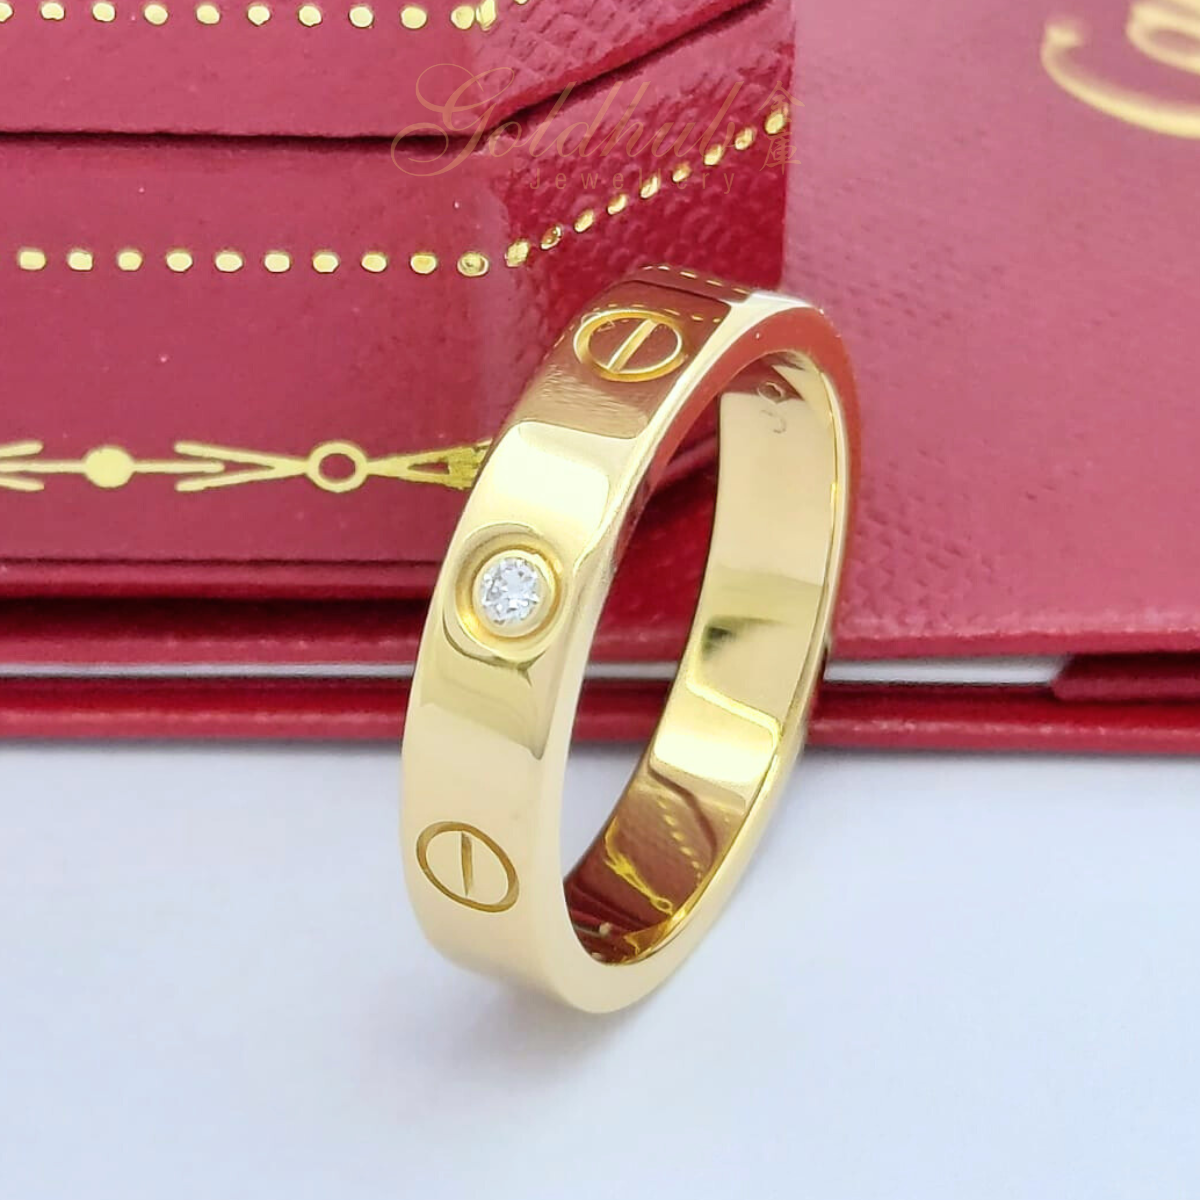 18k Pre-loved Cartier Love Wedding Band, 1 Diamond Ring in Yellow Gold